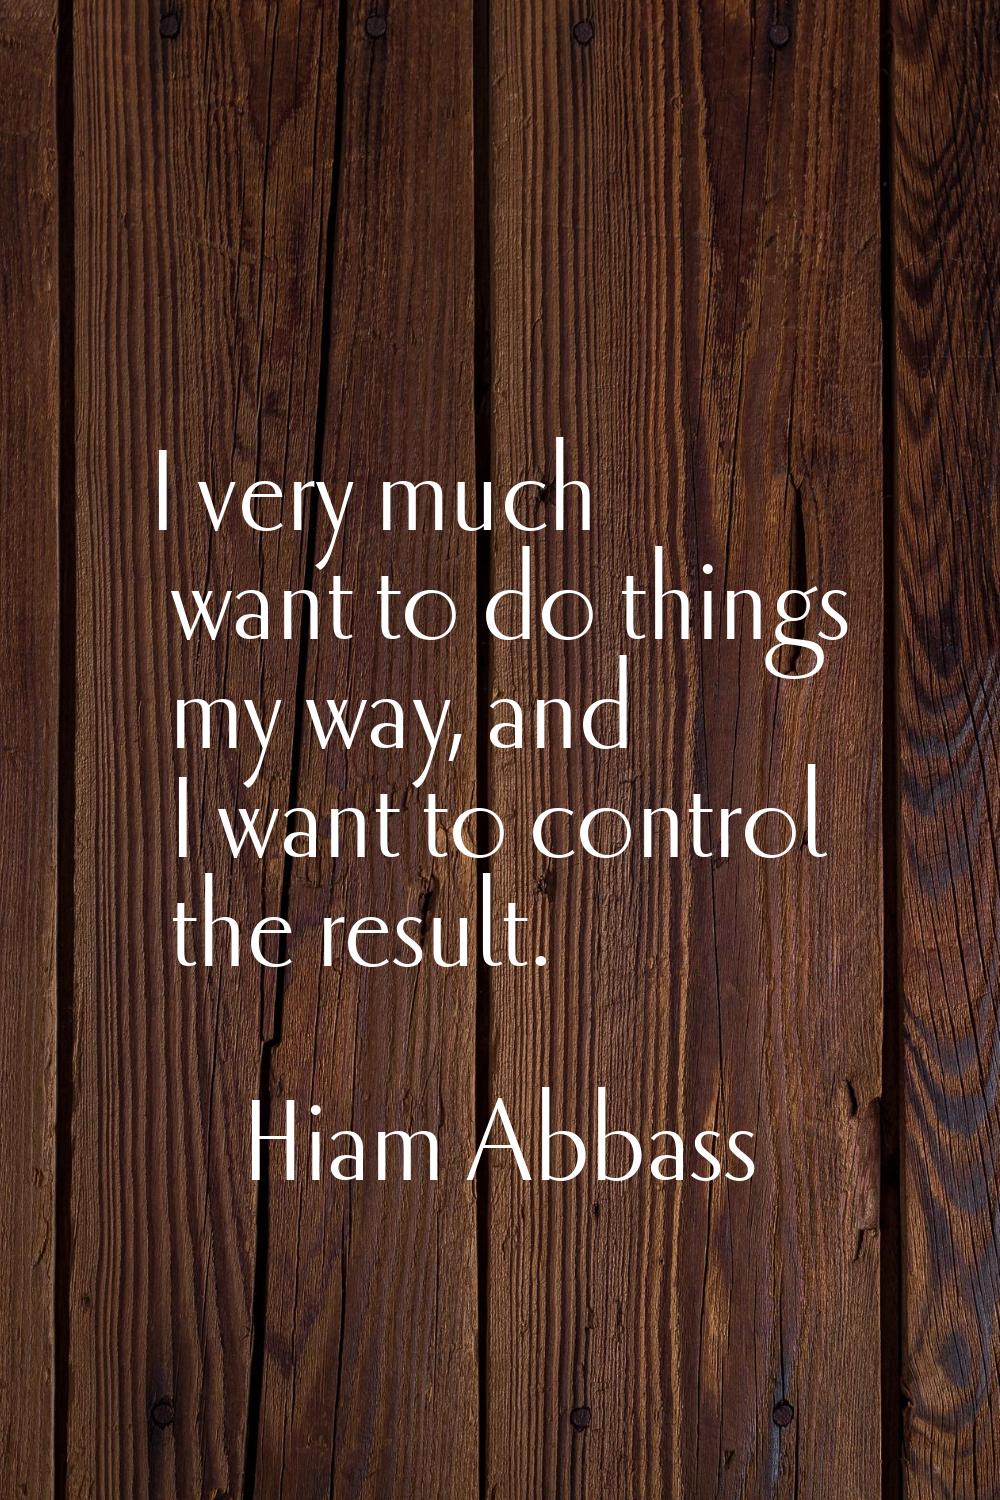 I very much want to do things my way, and I want to control the result.